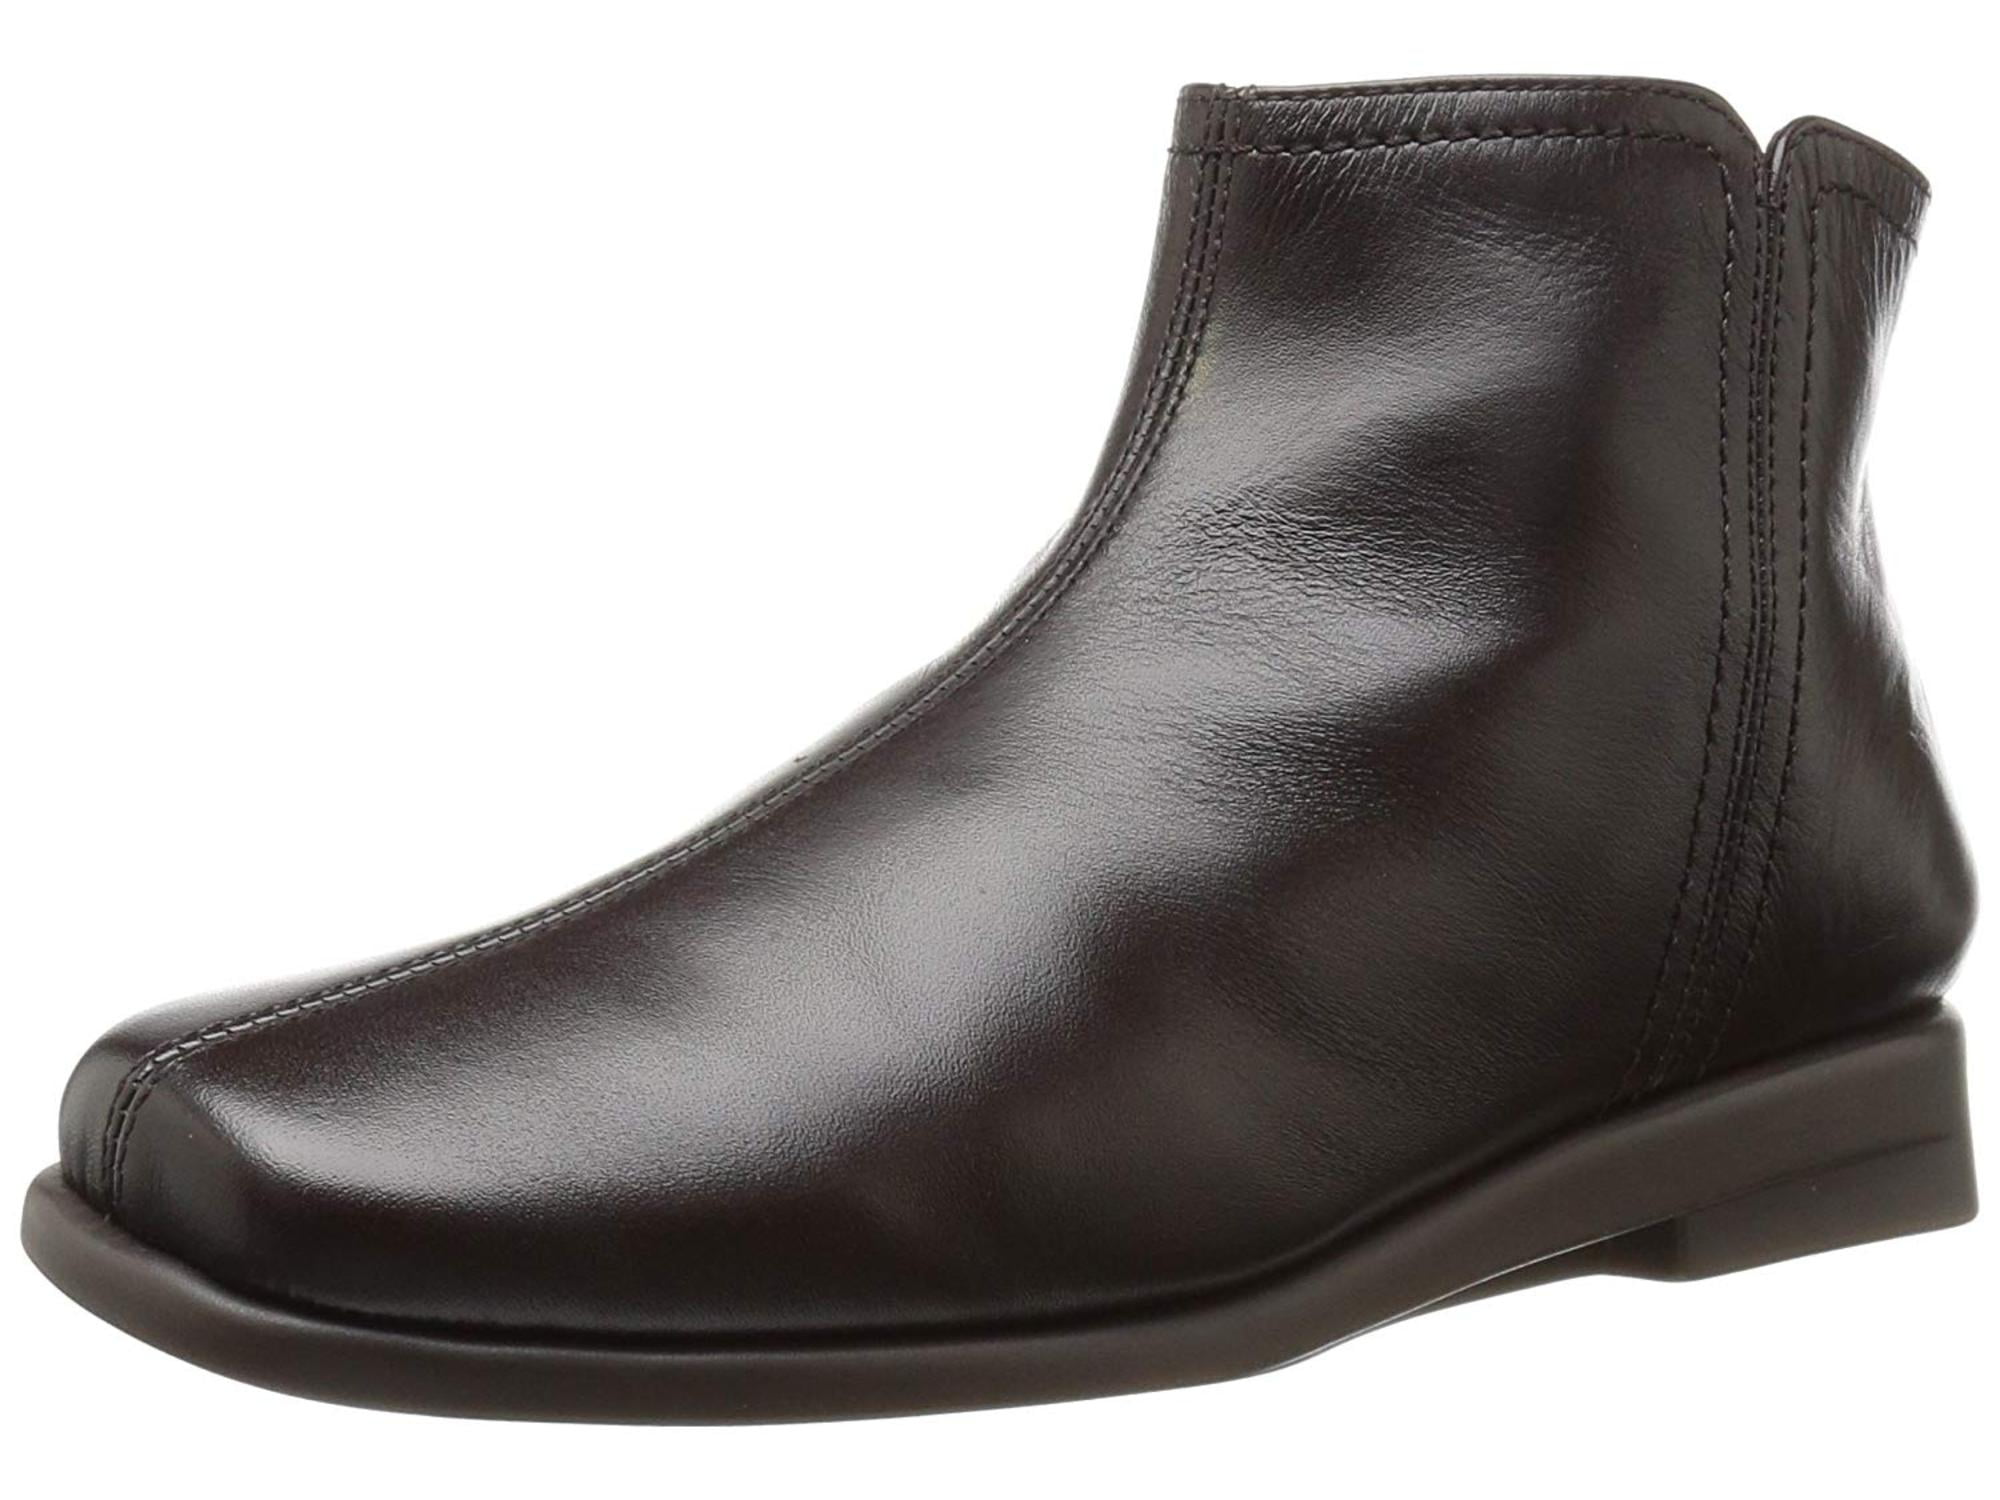 Aerosoles Women's Double Trouble 2 Ankle Boot, Dark Brown Leather, 6 ...